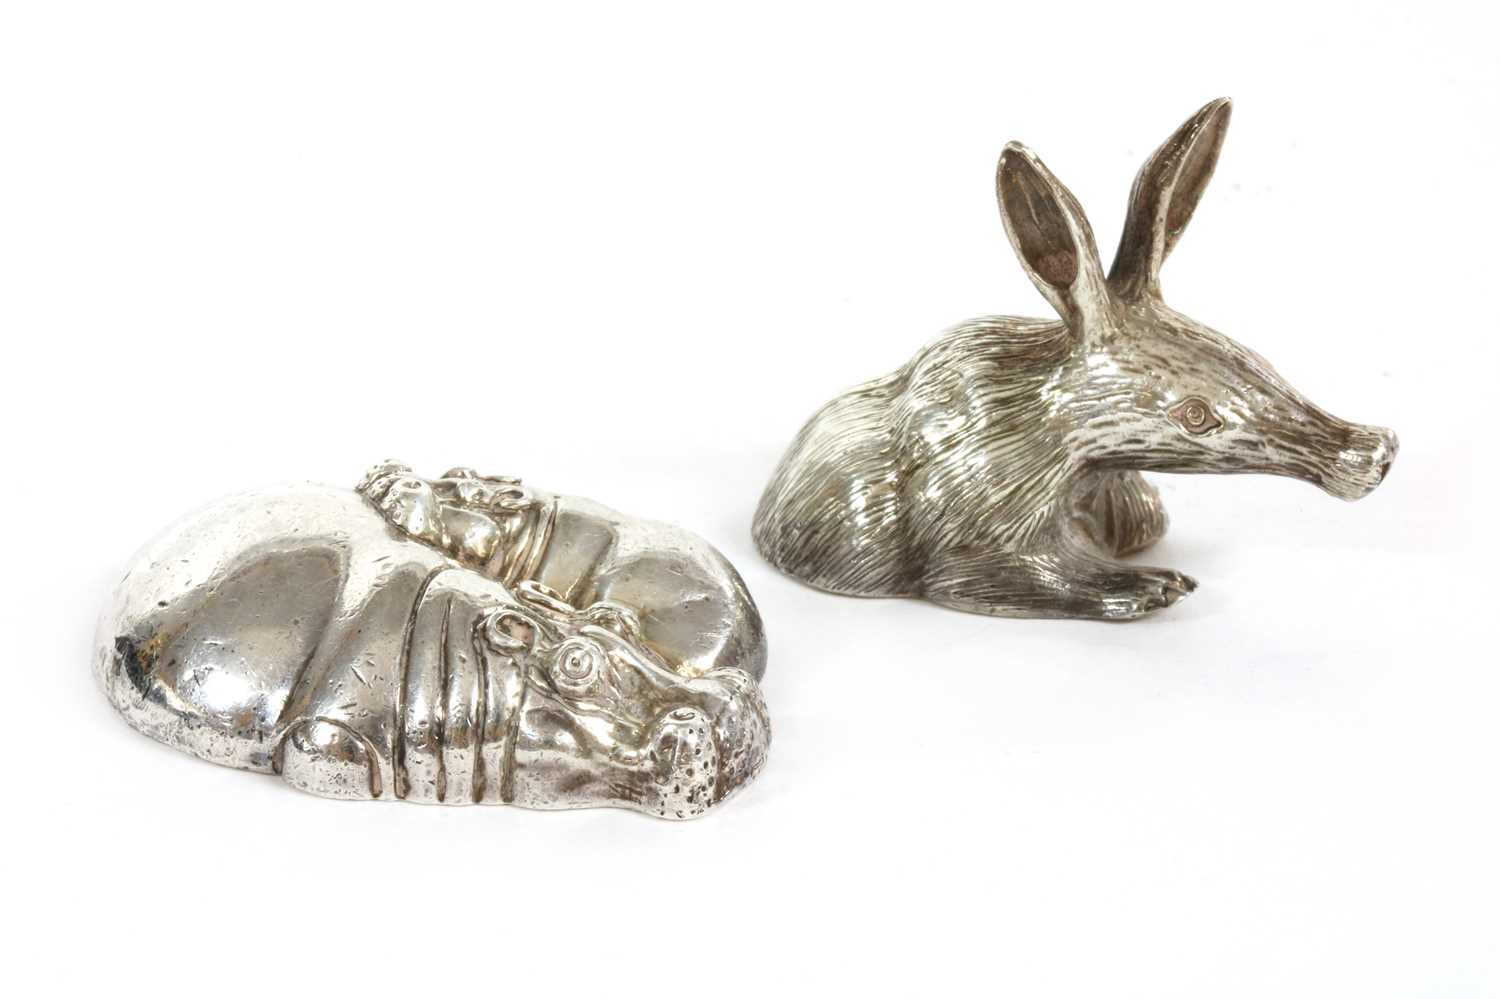 Lot 51 - A contemporary sterling silver sculpture of a hippopotamus and calf, by Patrick Mavros